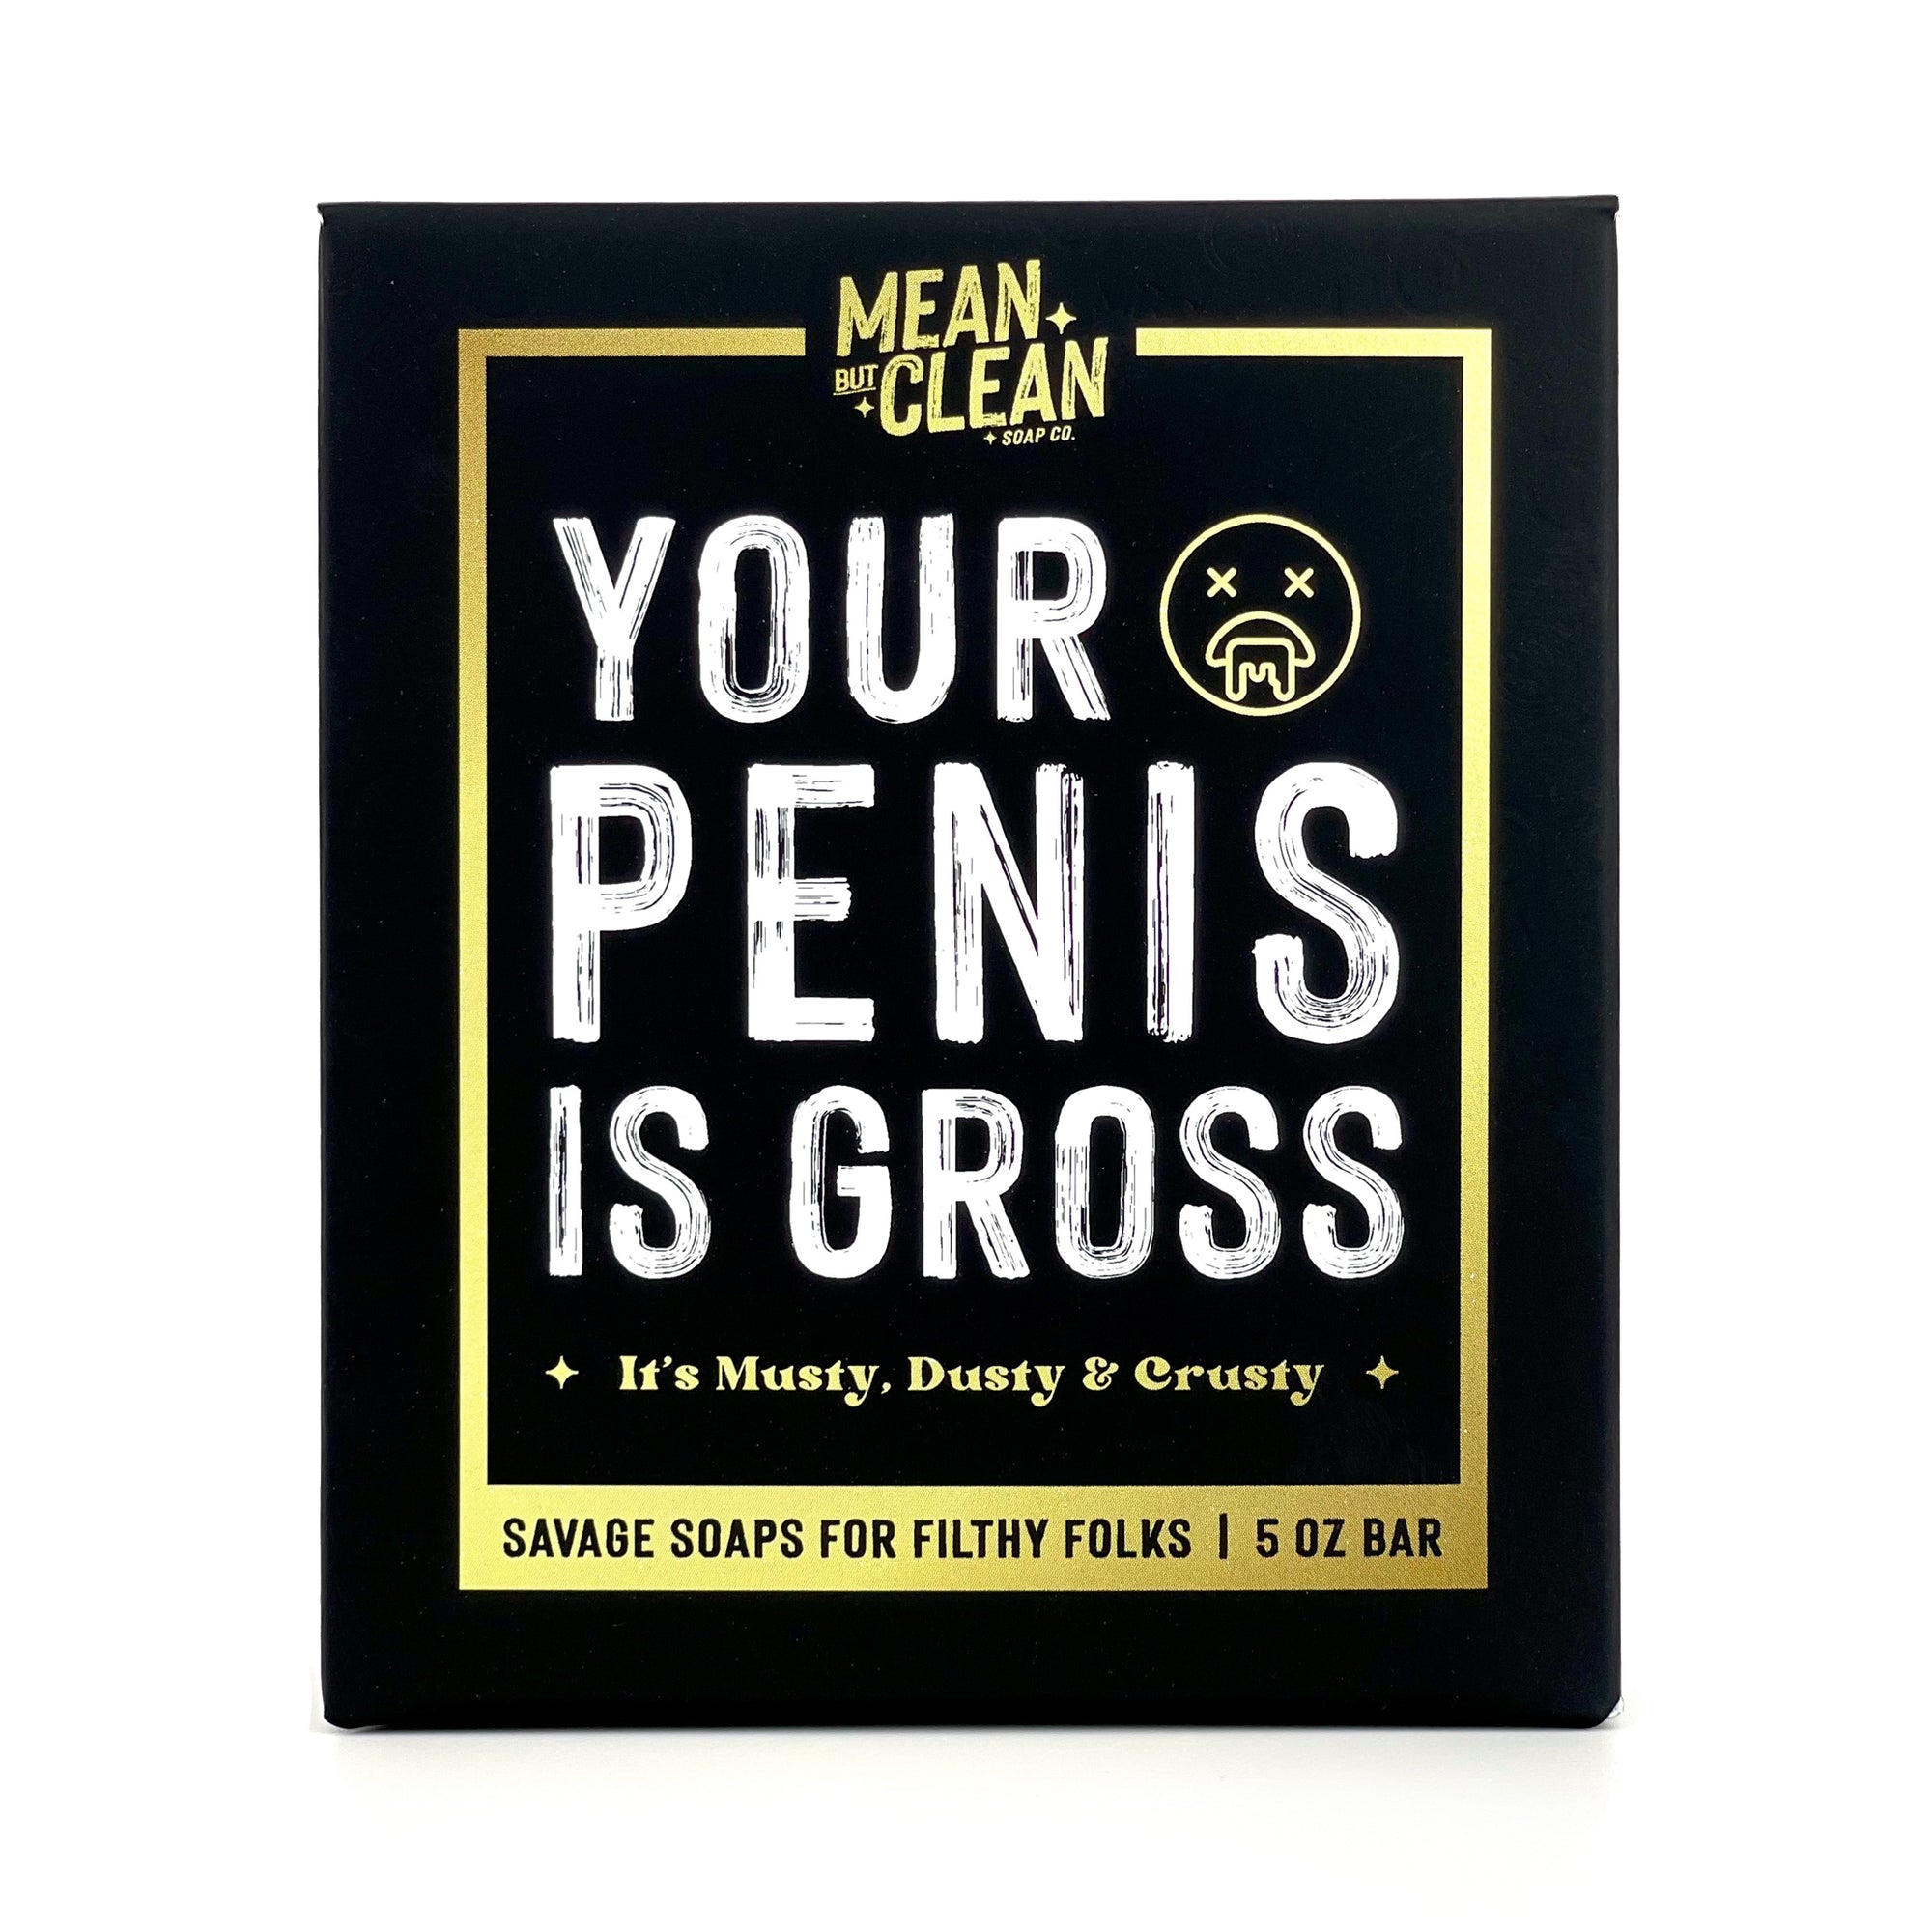 Your Penis Is Gross - Orange Pine Tar Soap - Natural Handmade Soap - Funny Gag Gift For Friends - Savage Soaps For Filthy Folks